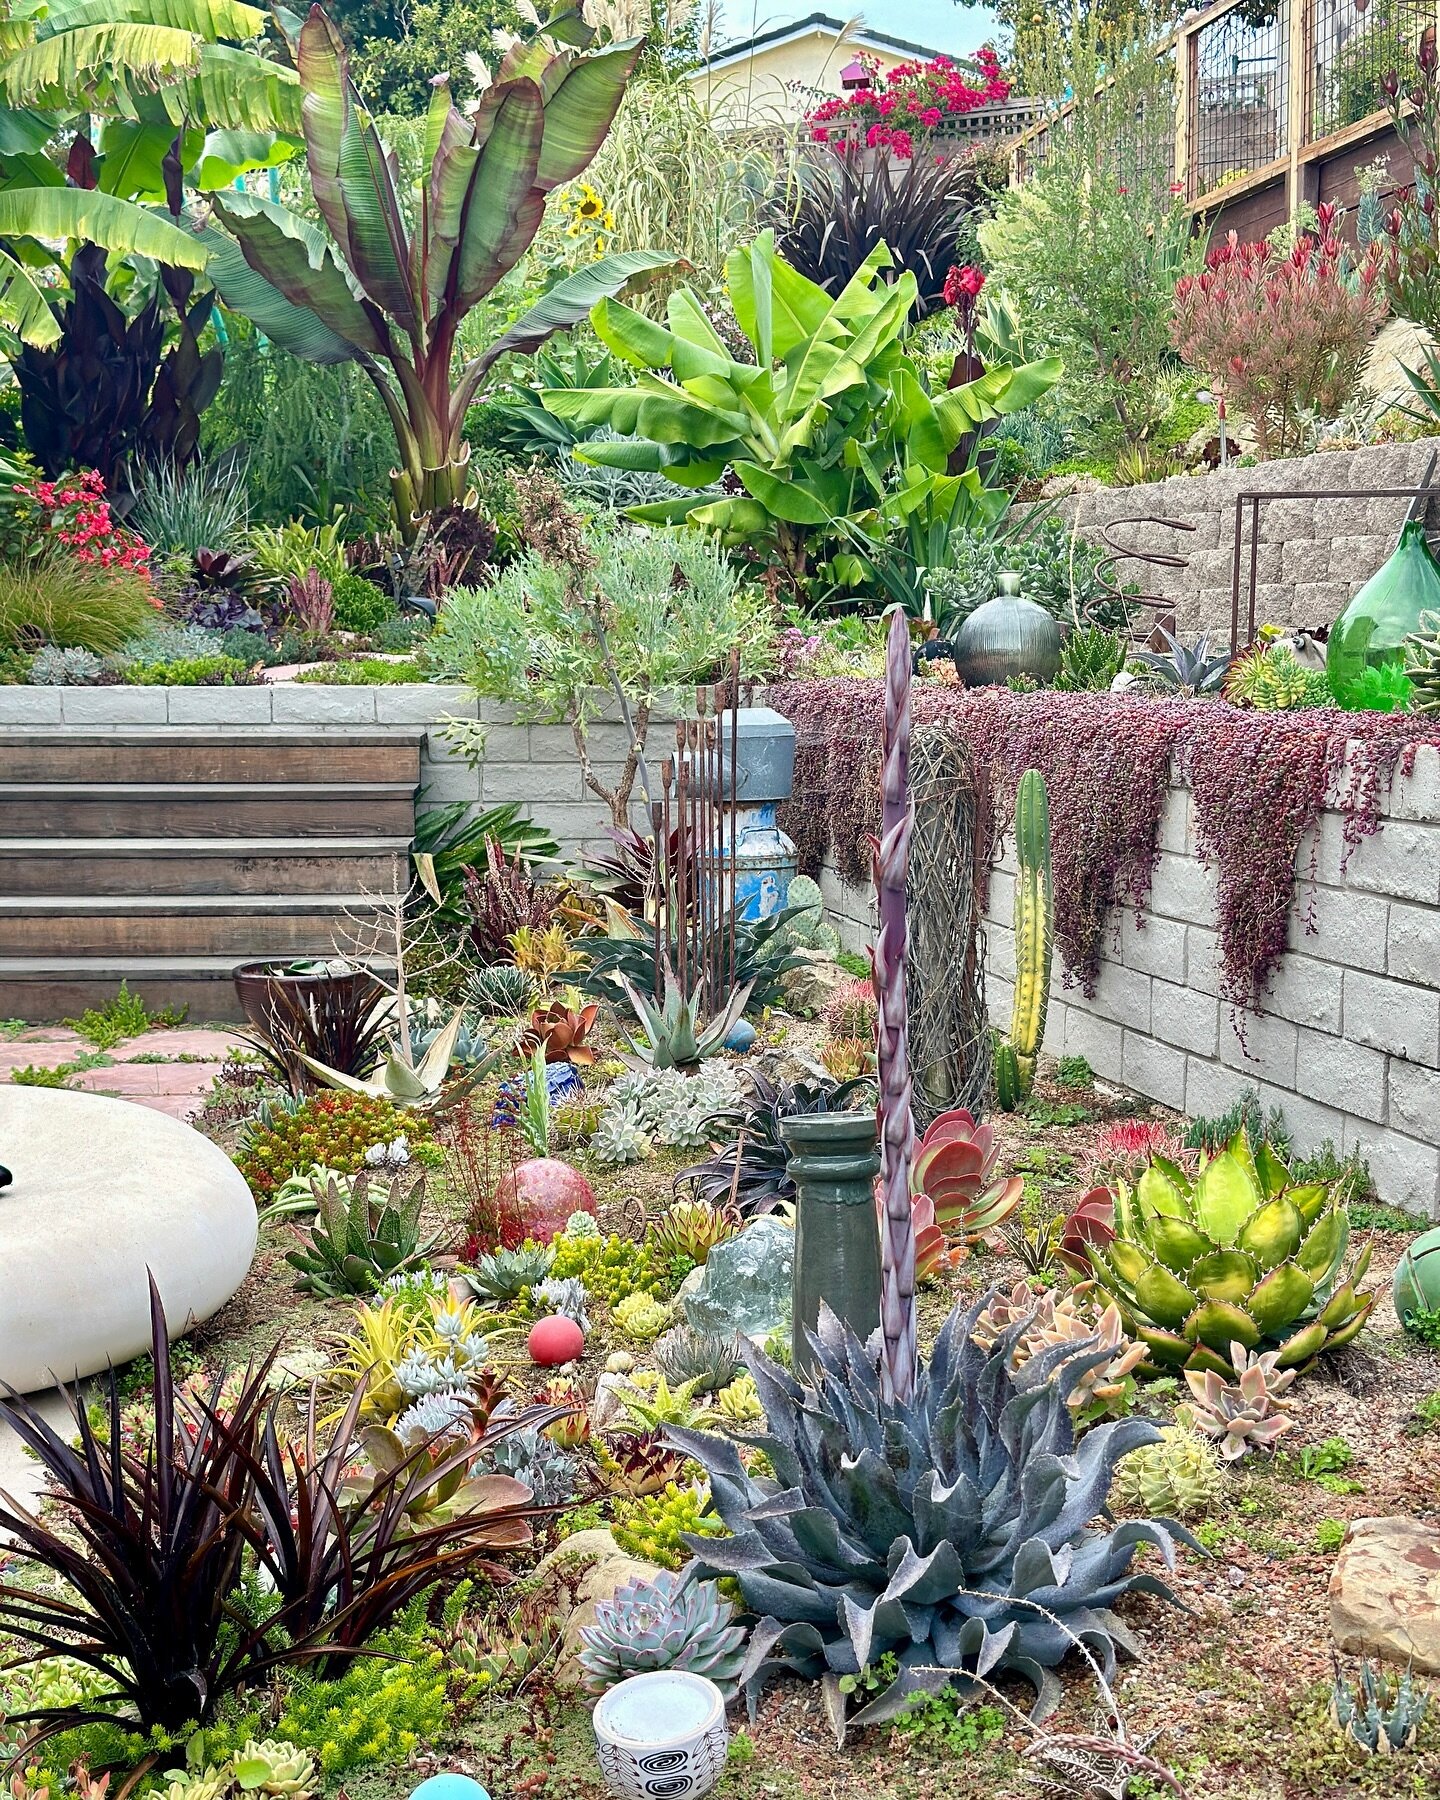 Our home tropical, experimental garden is full of texture, color, objects and art. Everyday presents a new discovery. We believe gardens add intrinsic value to ones overall well-being and happiness. Farallon Gardens doing things differently since 200